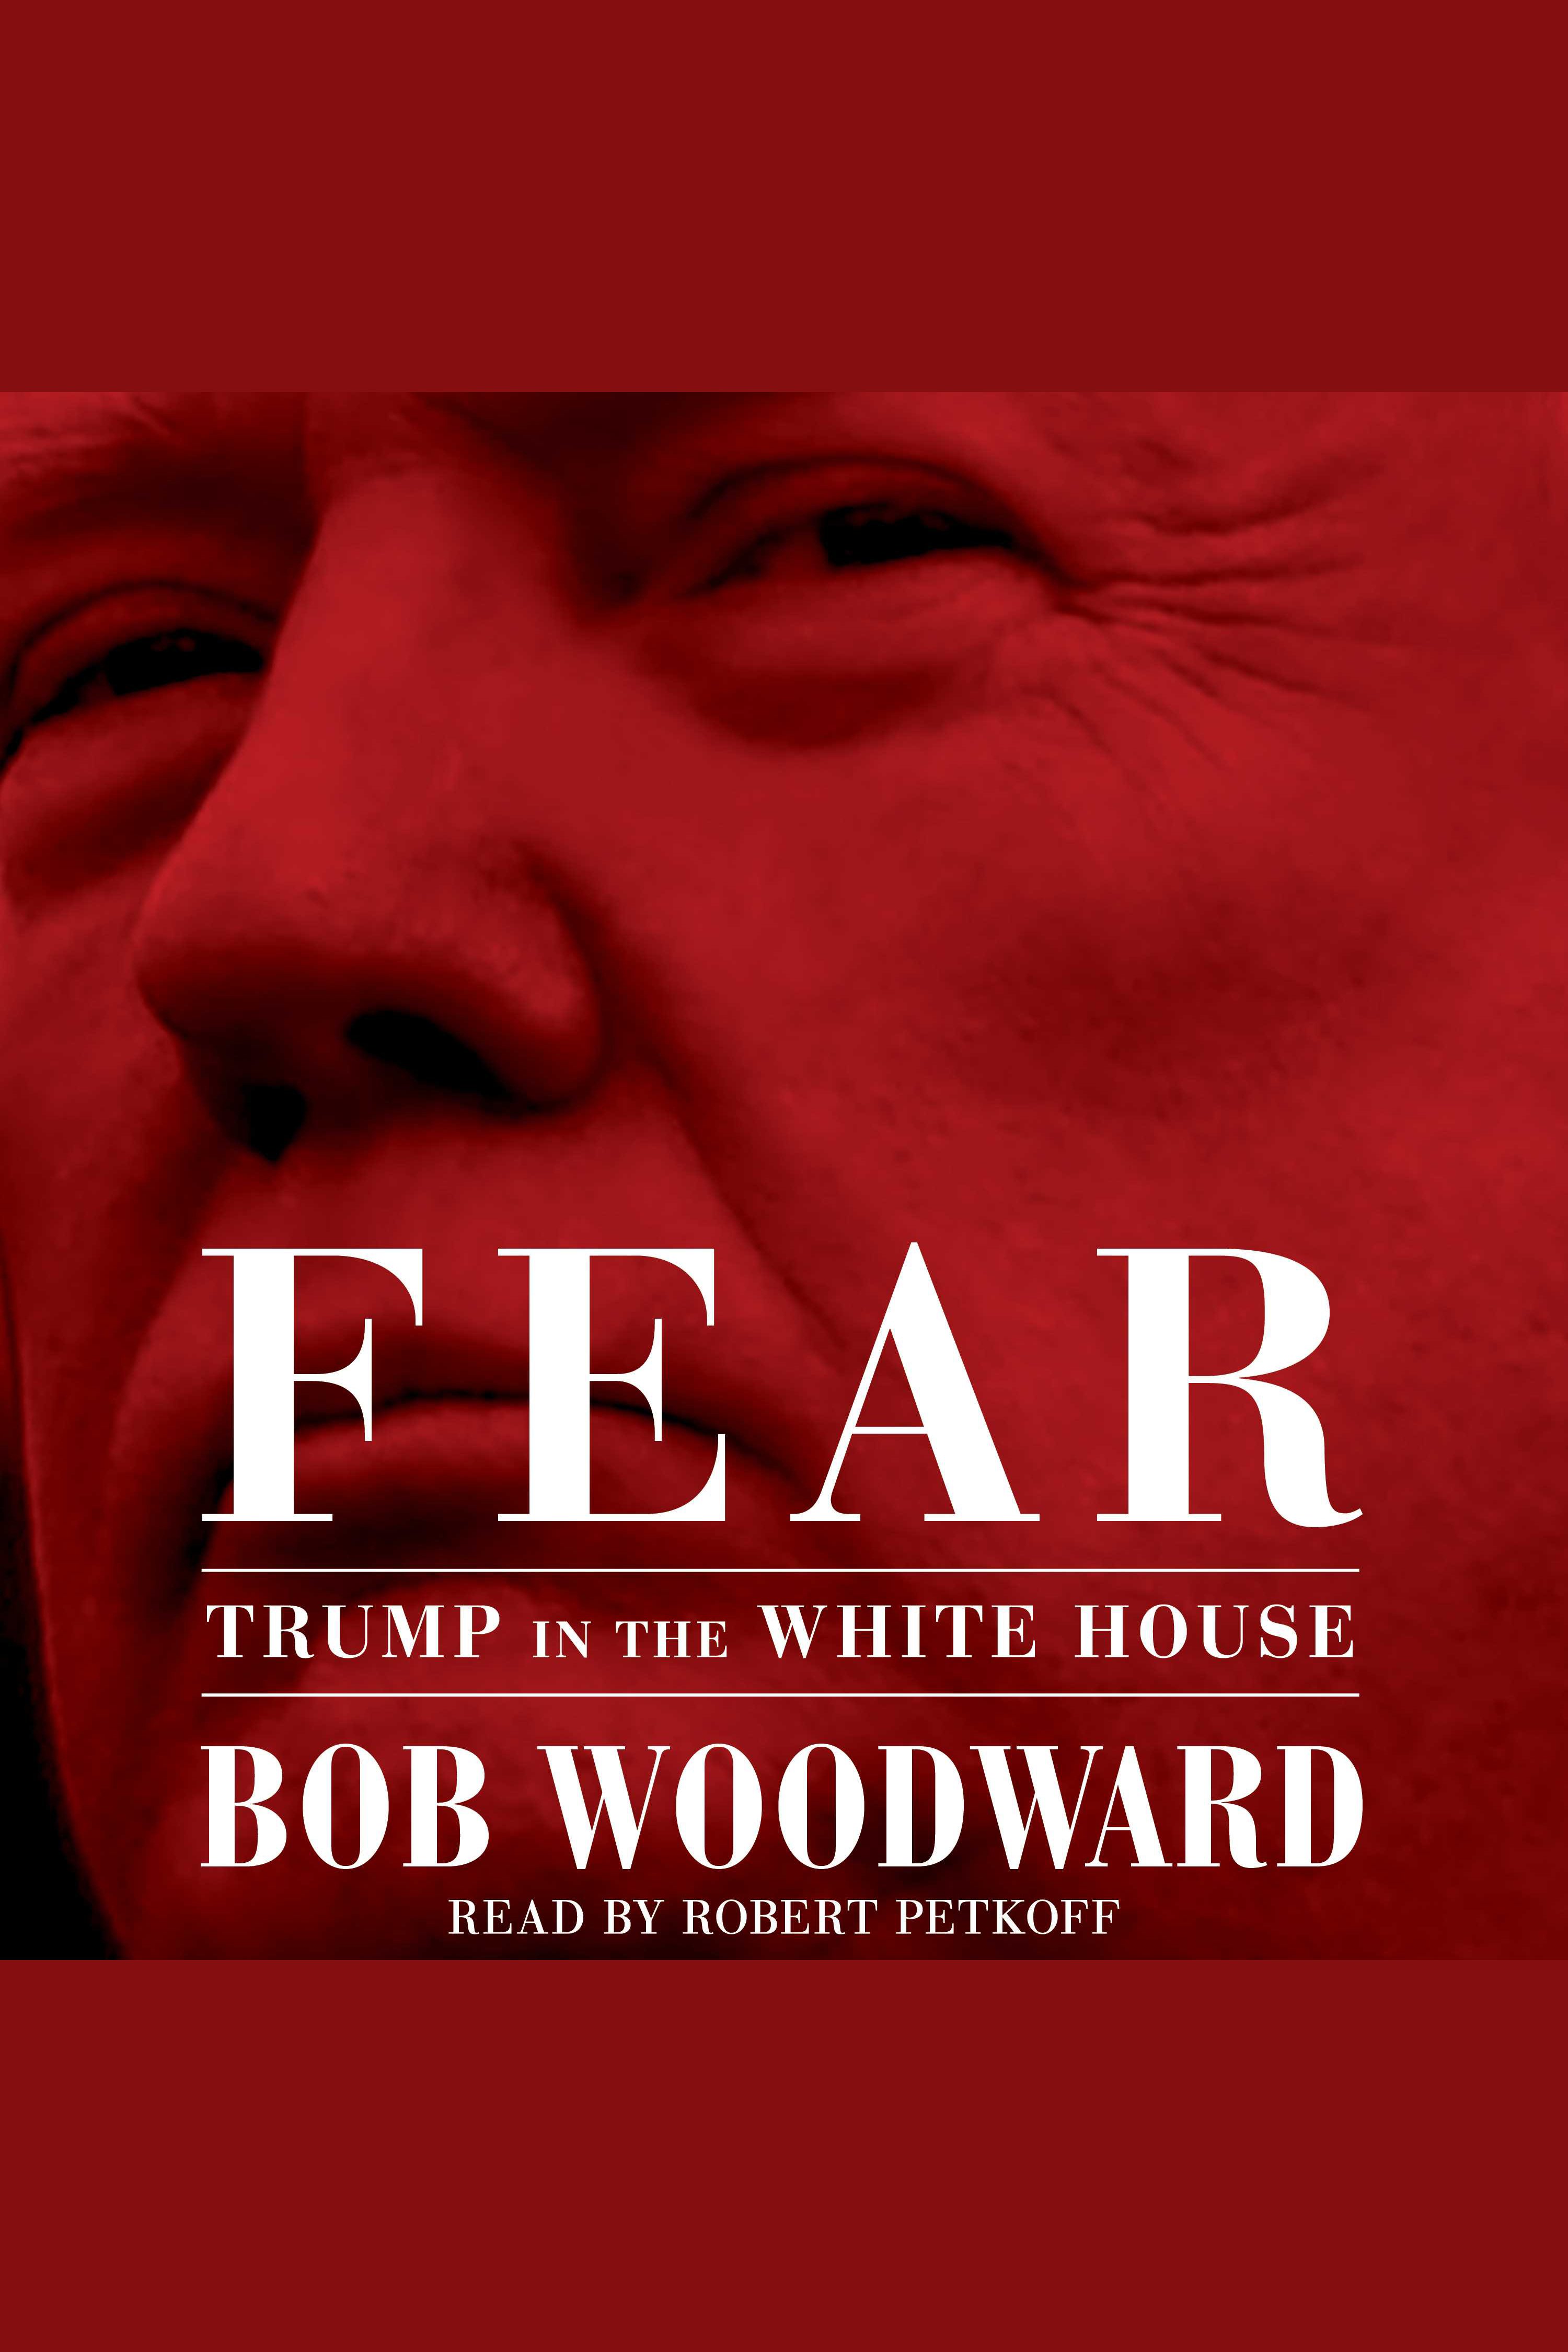 Fear Trump in the White House cover image